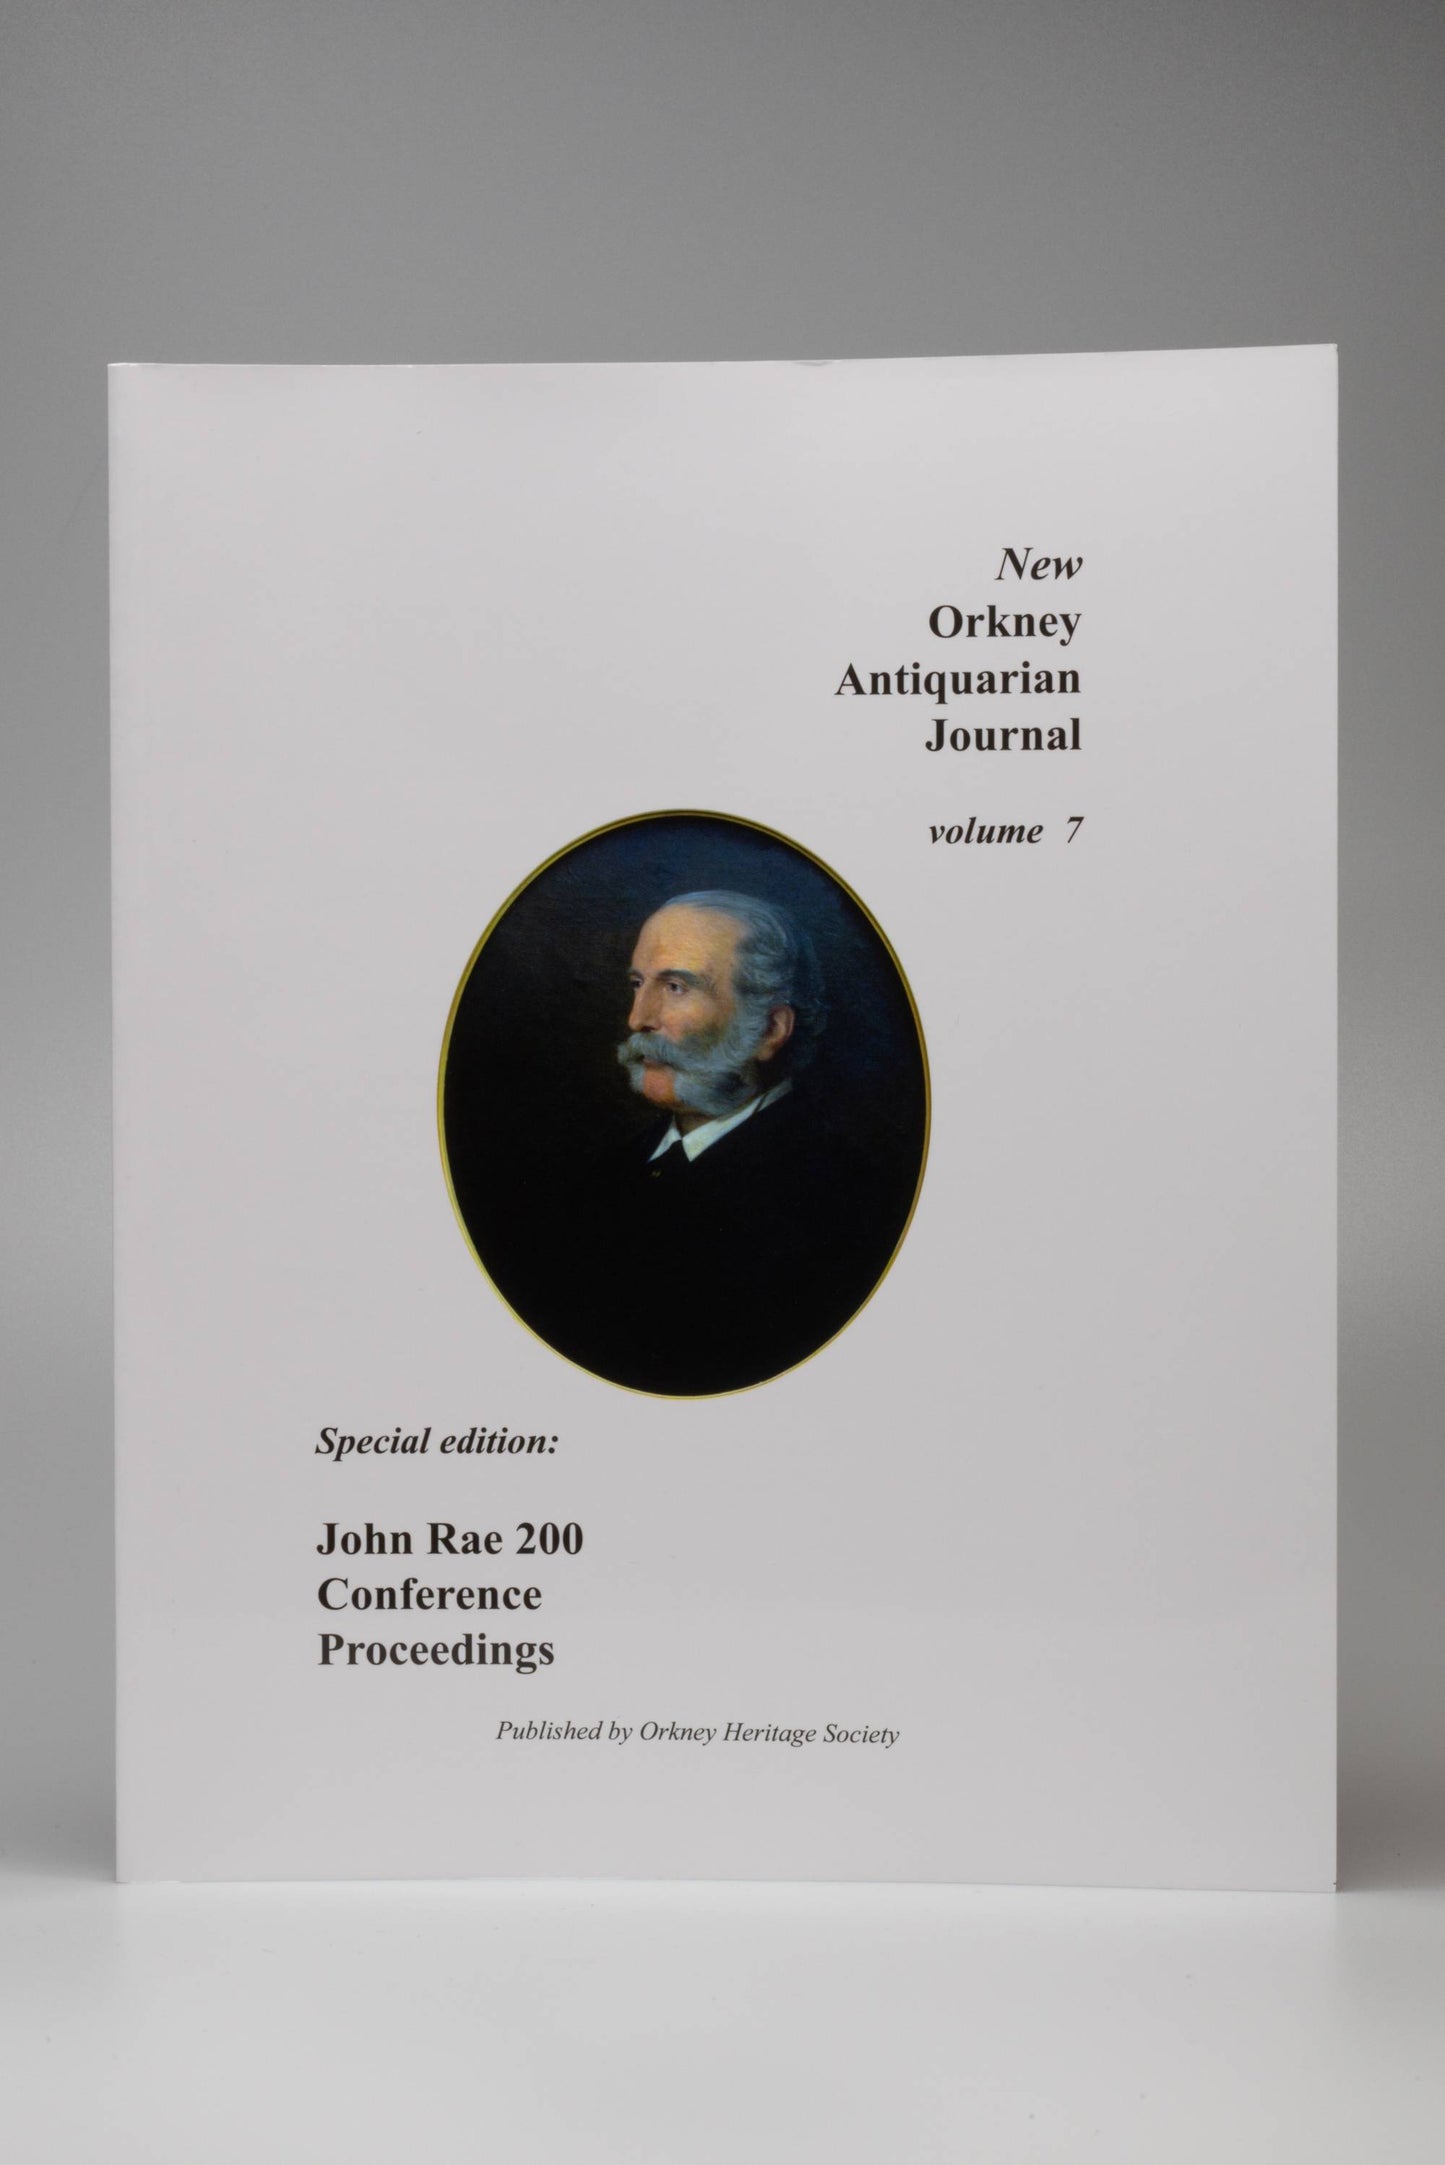 New Orkney Antiquarian Journal, Volume 7: John Rae 200 Conference Proceedings